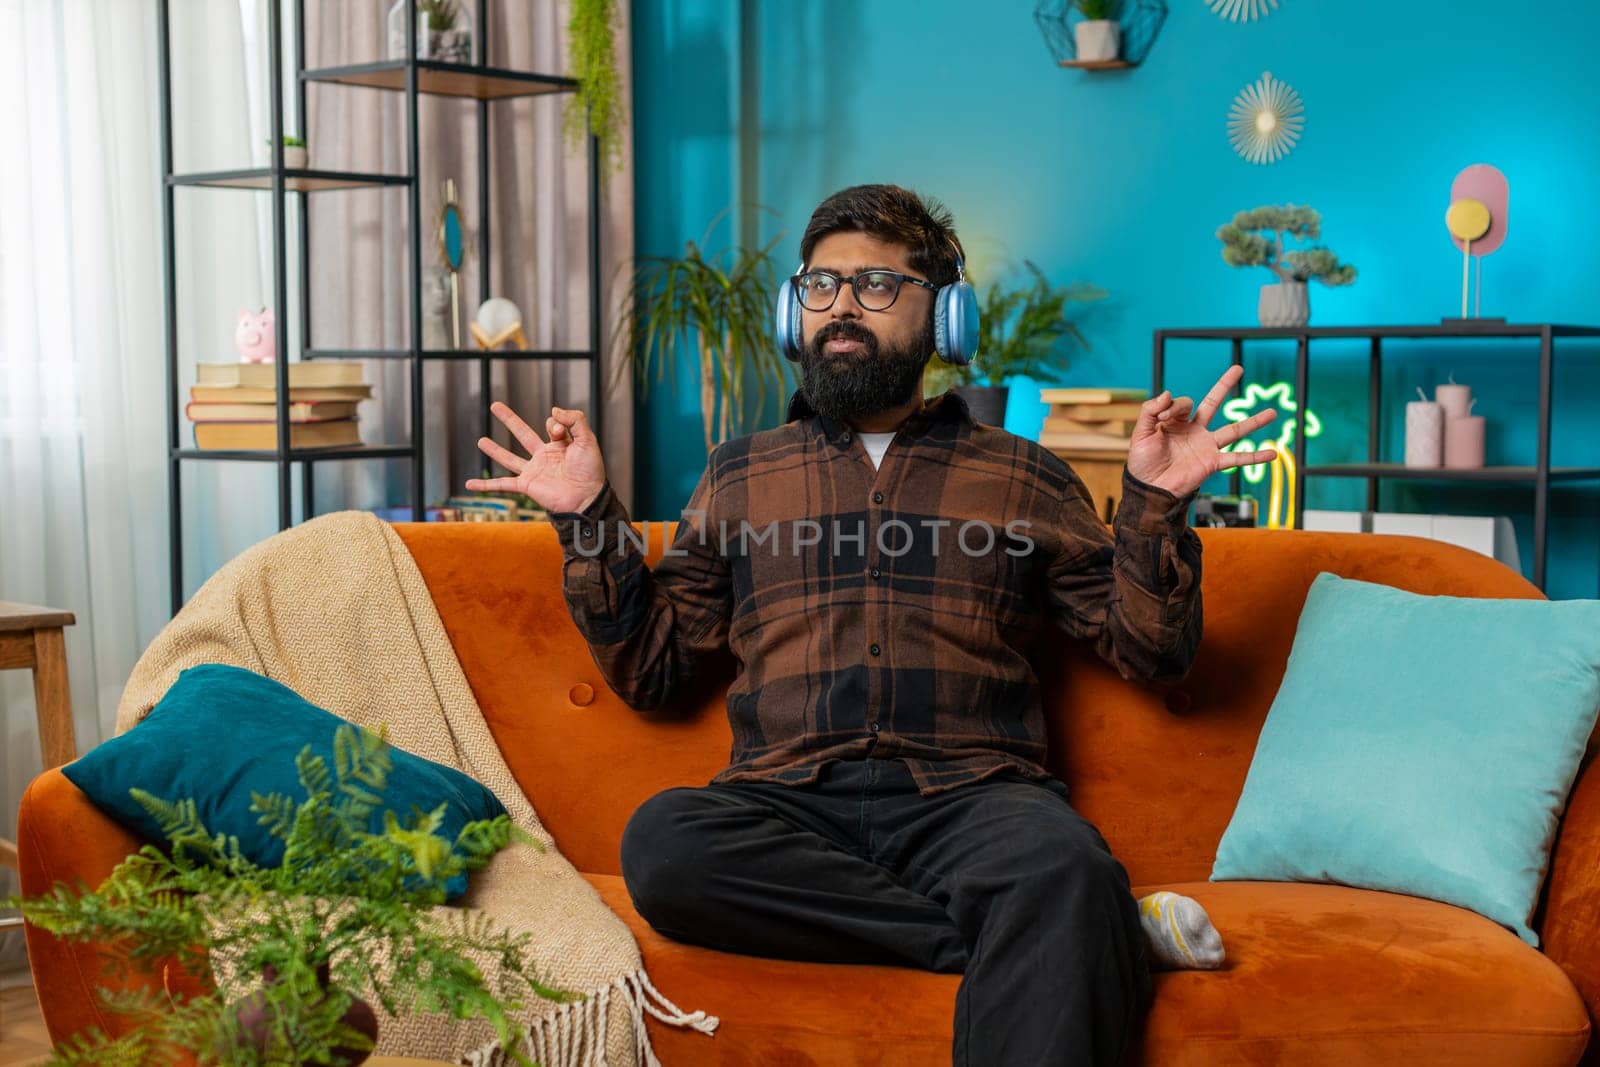 Indian man listening music via headphones, breathes deeply, eyes closed meditating with concentrated thoughts, peaceful mind. Hispanic guy relaxing, taking a break sitting at home living room sofa.